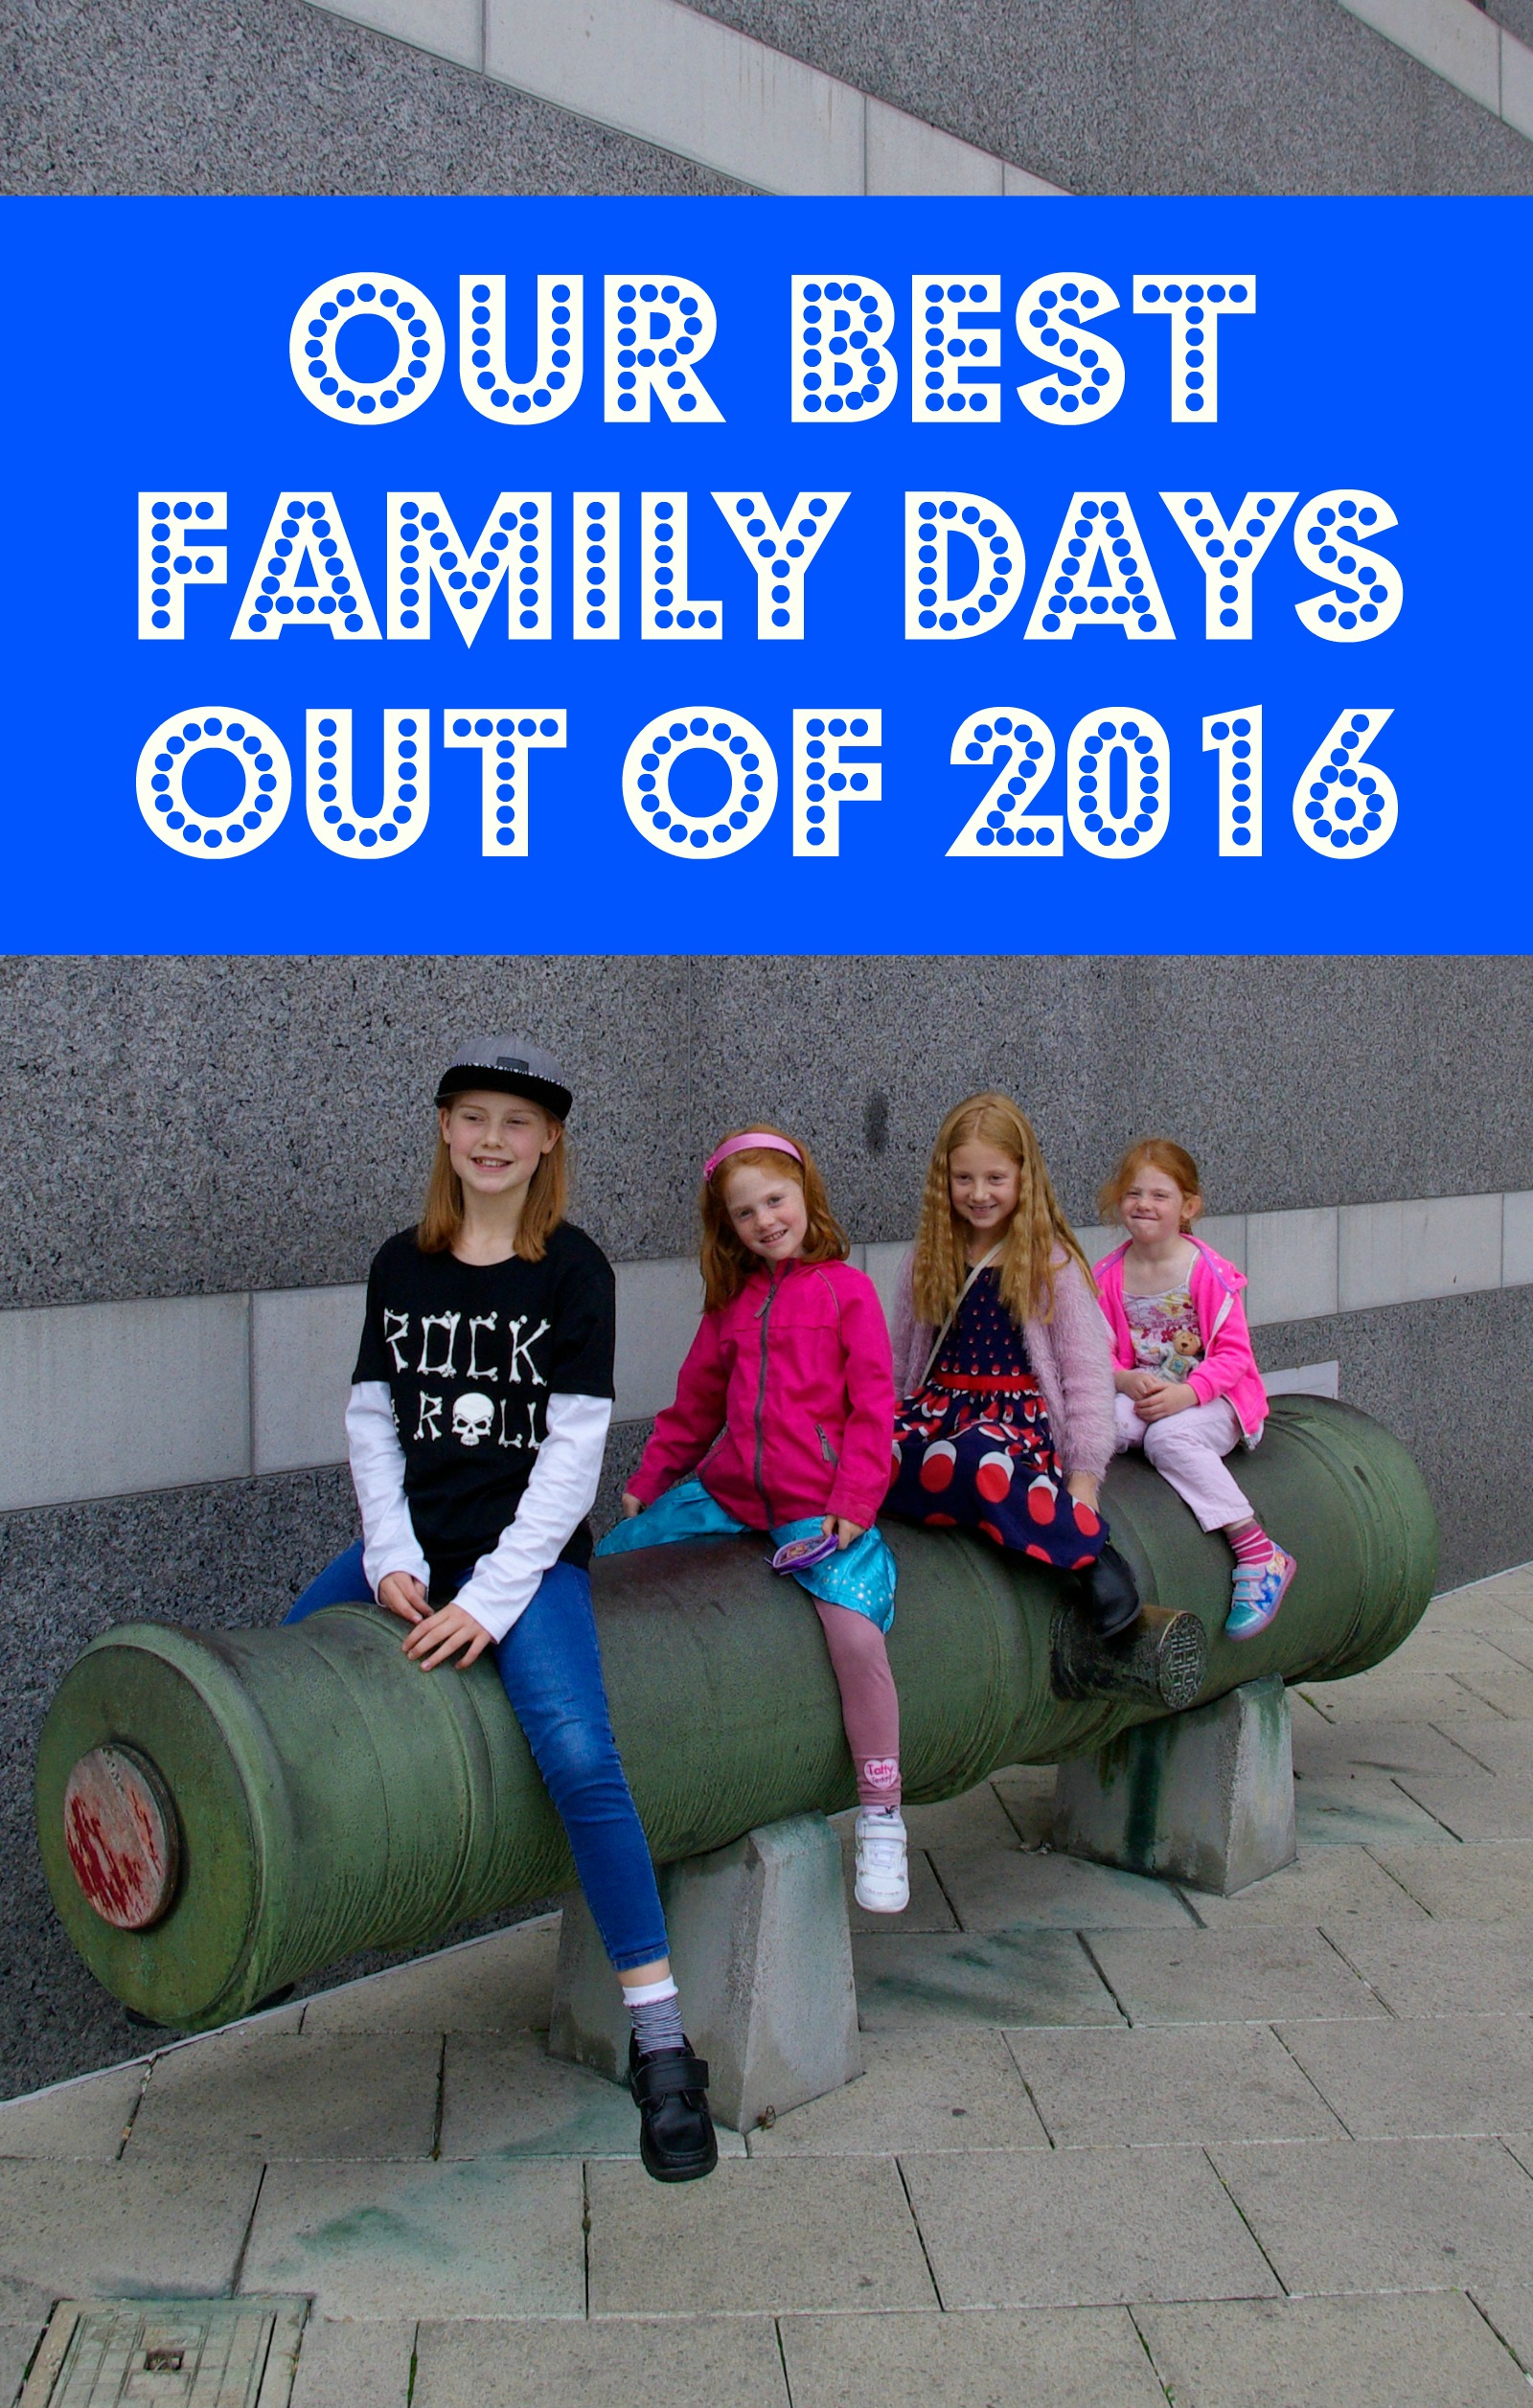 Our top family days out for 2016